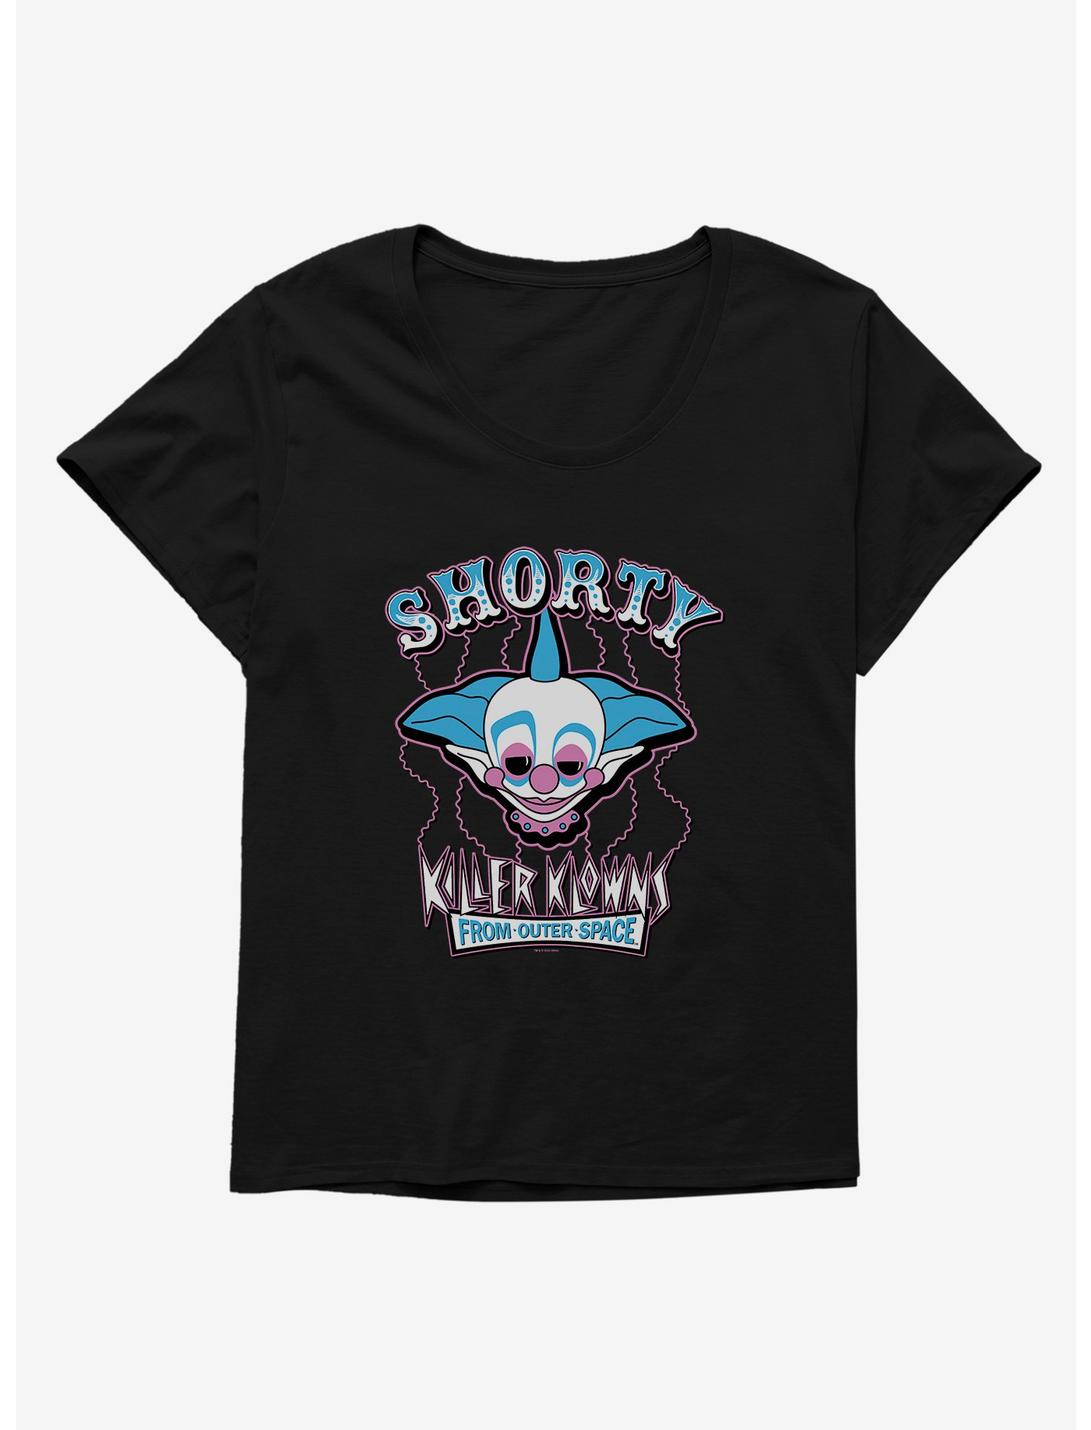 Killer Klowns From Outer Space Shorty Womens T-Shirt Plus Size, BLACK, hi-res